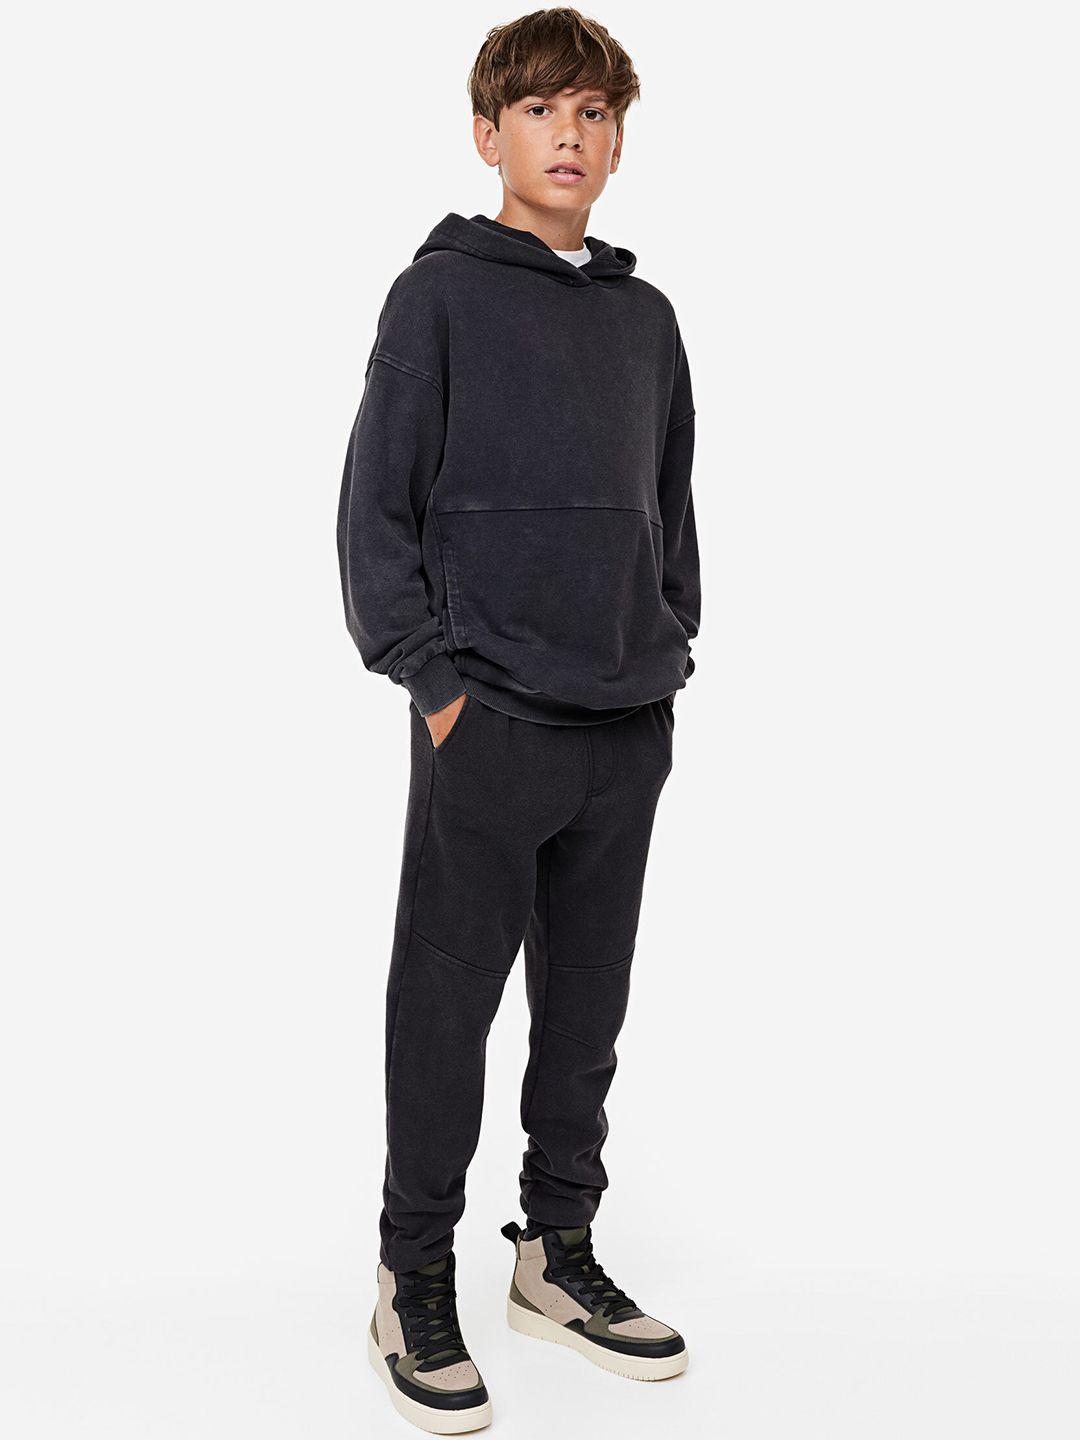 h&m boys black washed-look joggers trousers